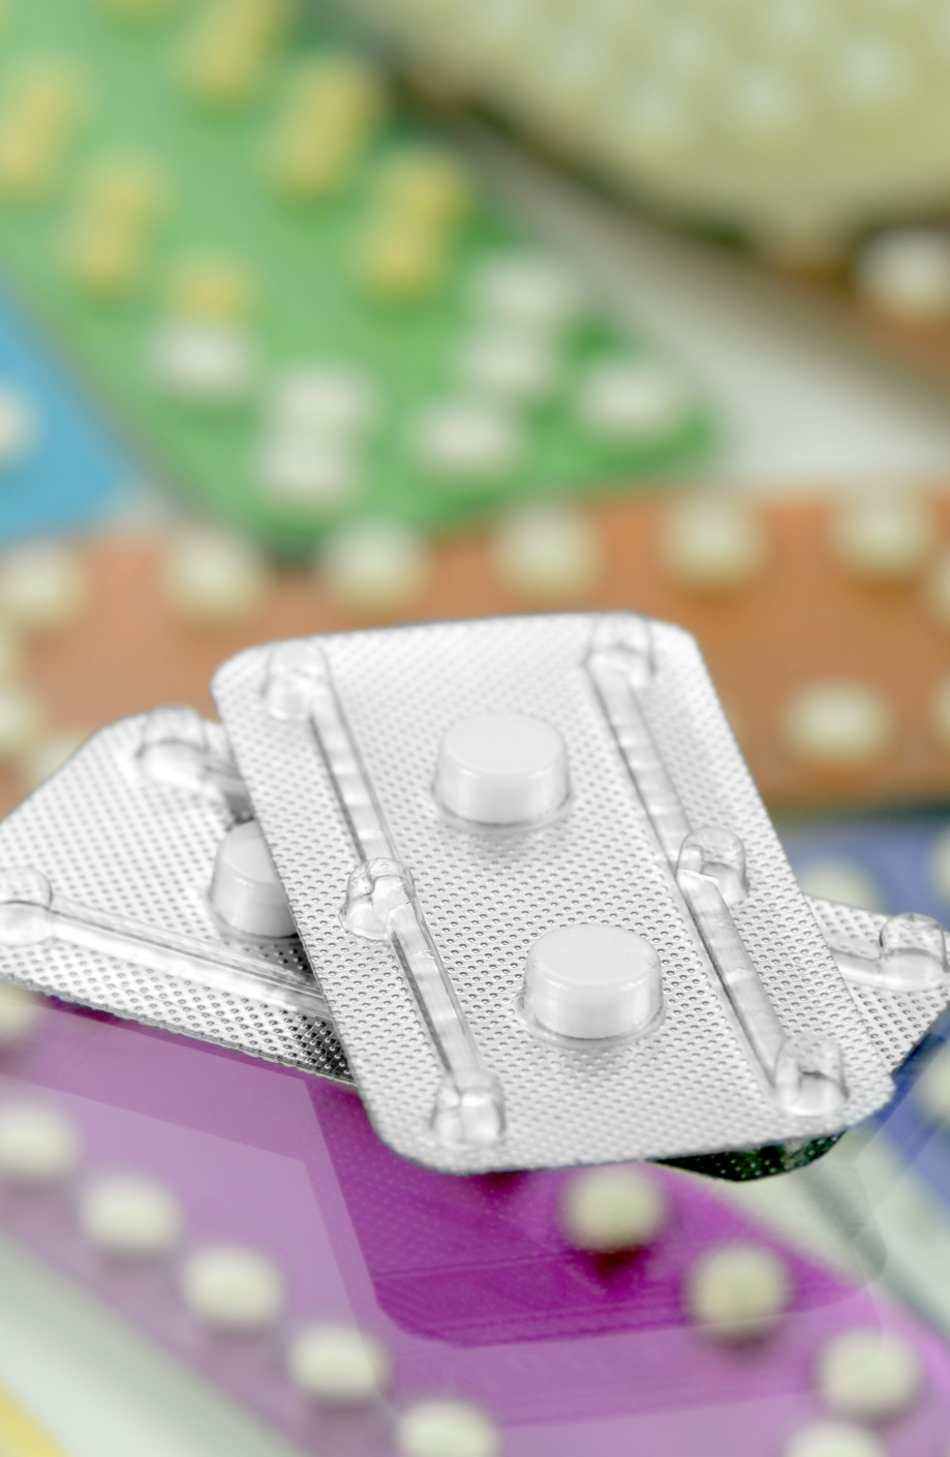 Emergency Contraception is Available Online